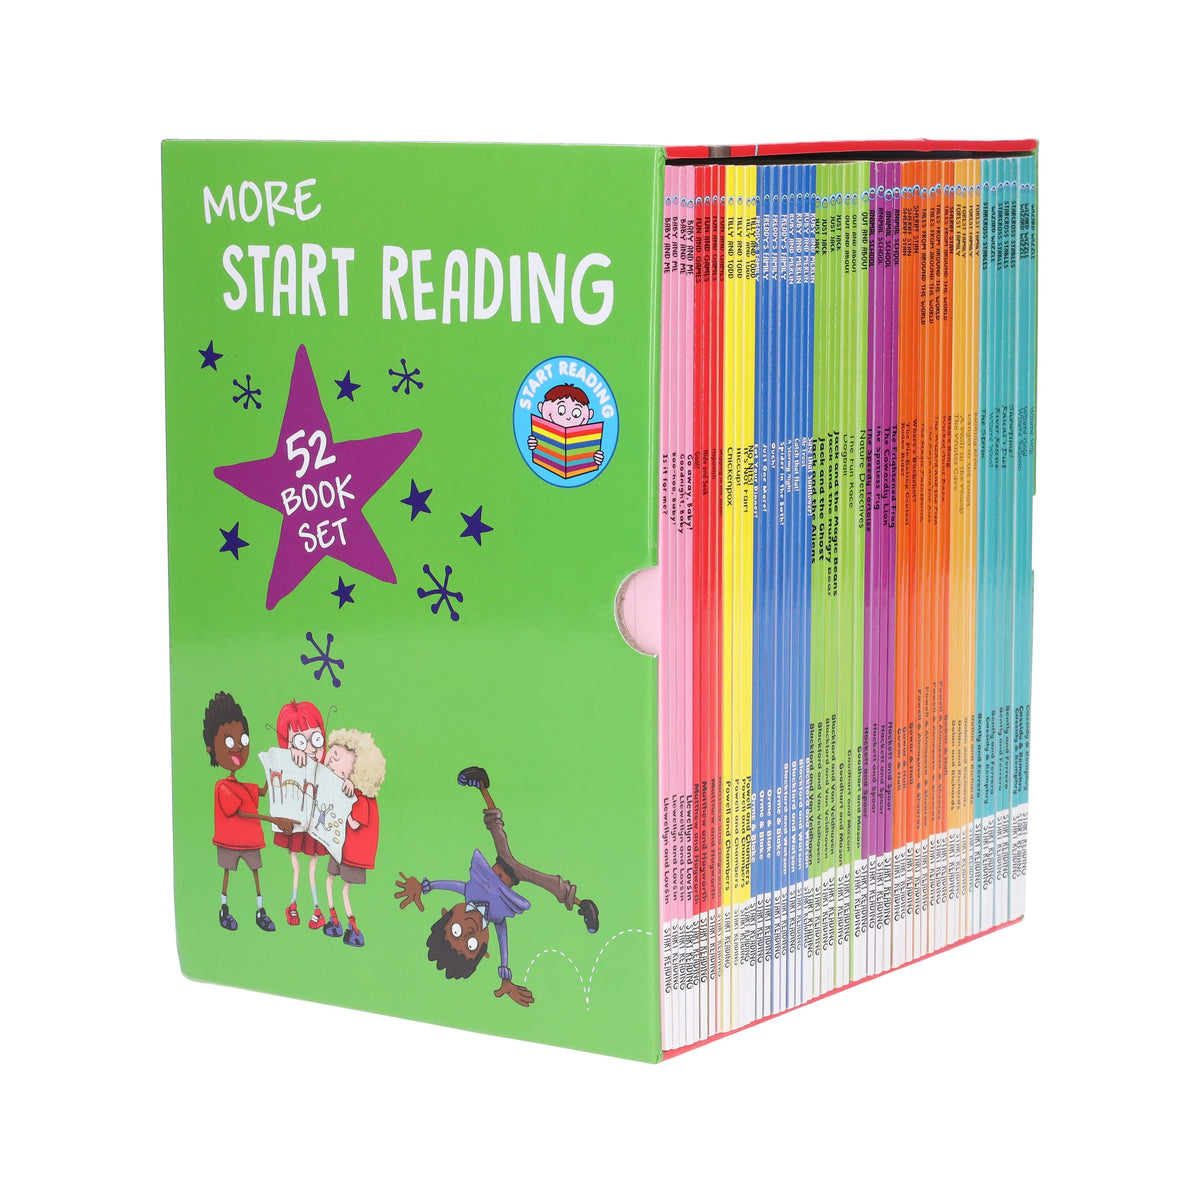 More Start Reading Series 52 Books Collection Set - Ages 4-7